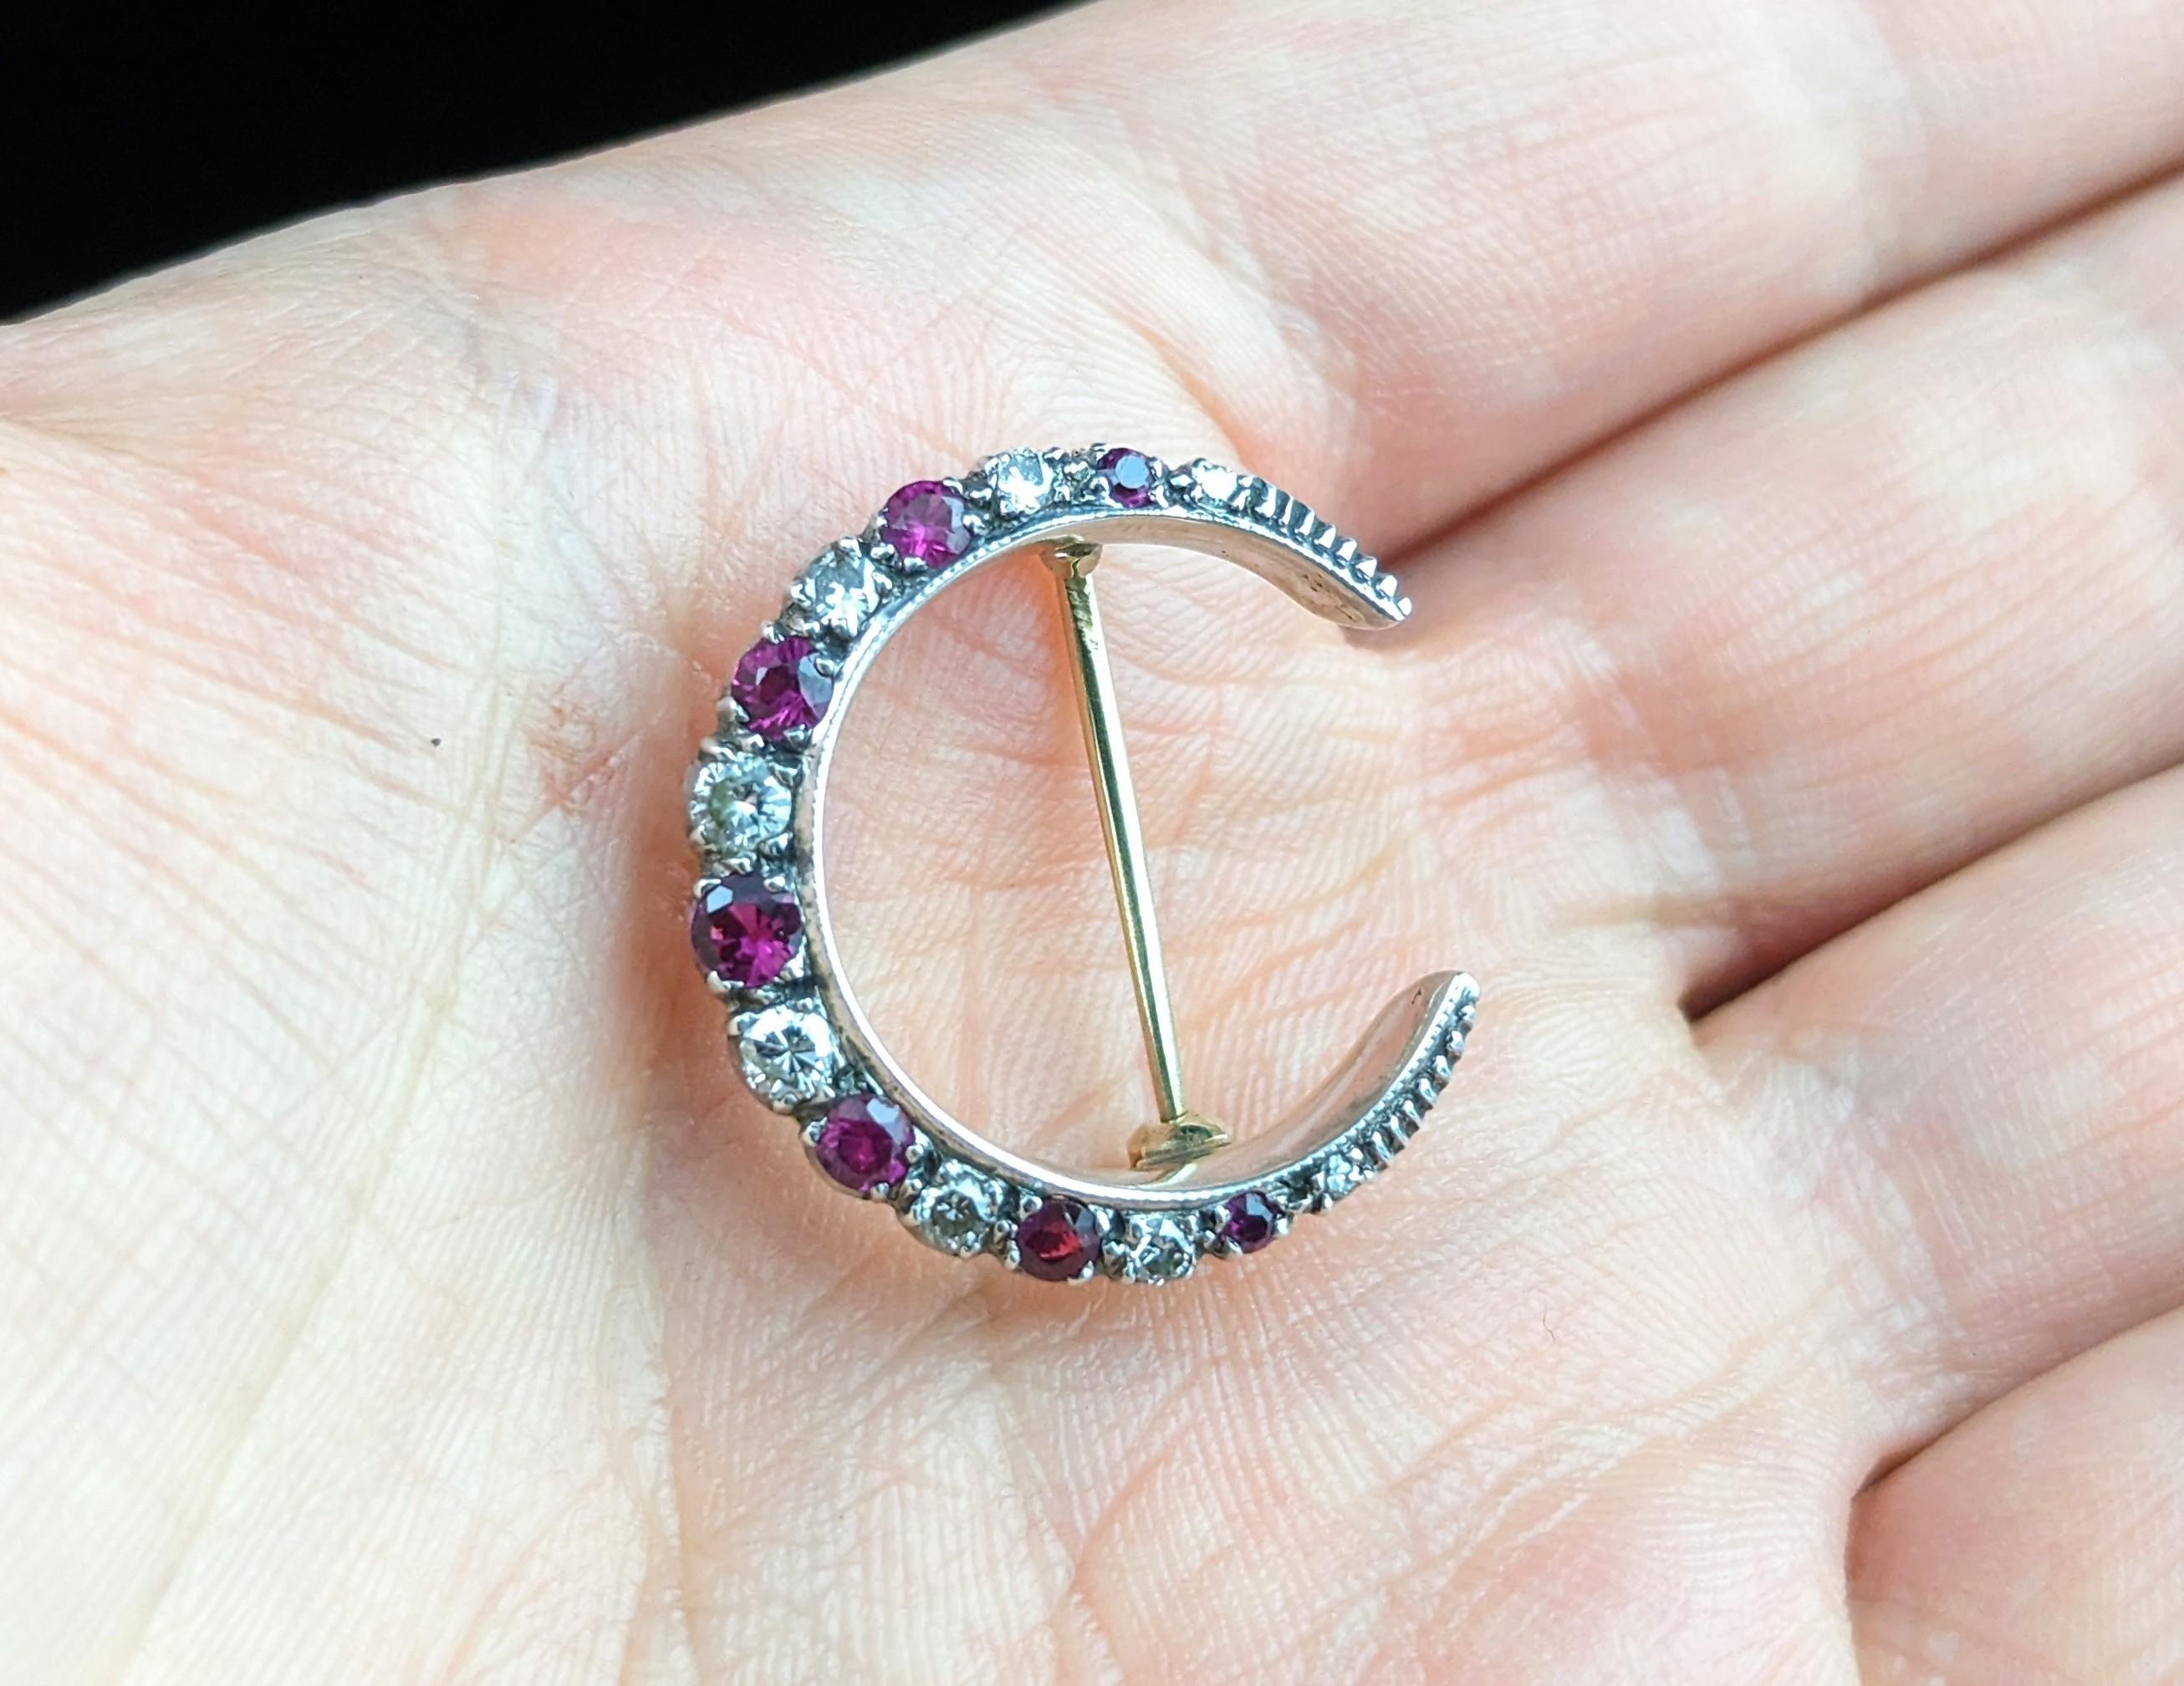 Antique Ruby and Diamond crescent brooch, silver and 9k gold  For Sale 5